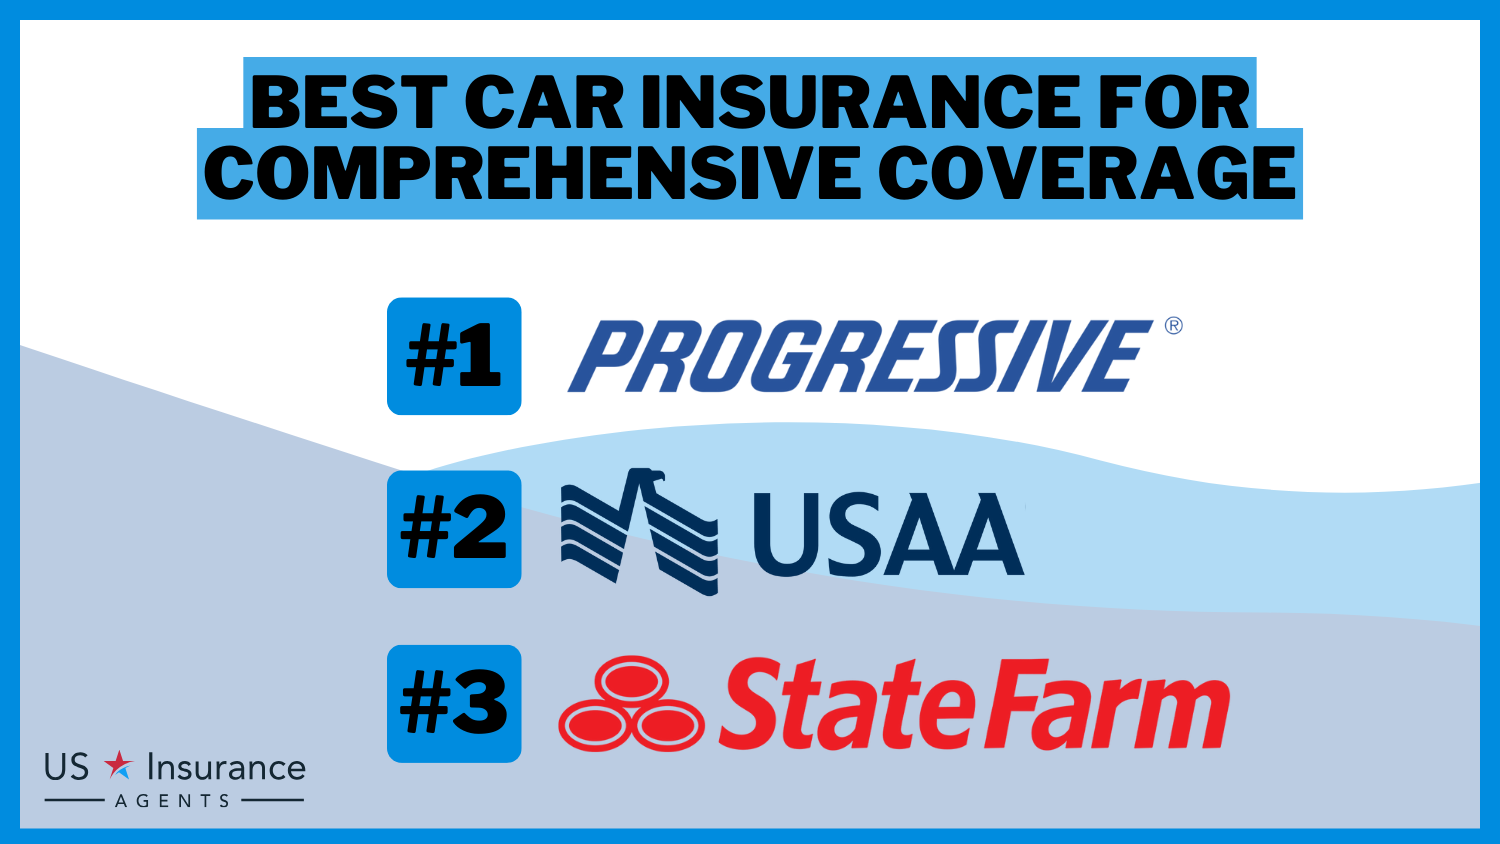 3 Best Car Insurance for Comprehensive Coverage: Progressive, USAA, and State Farm.